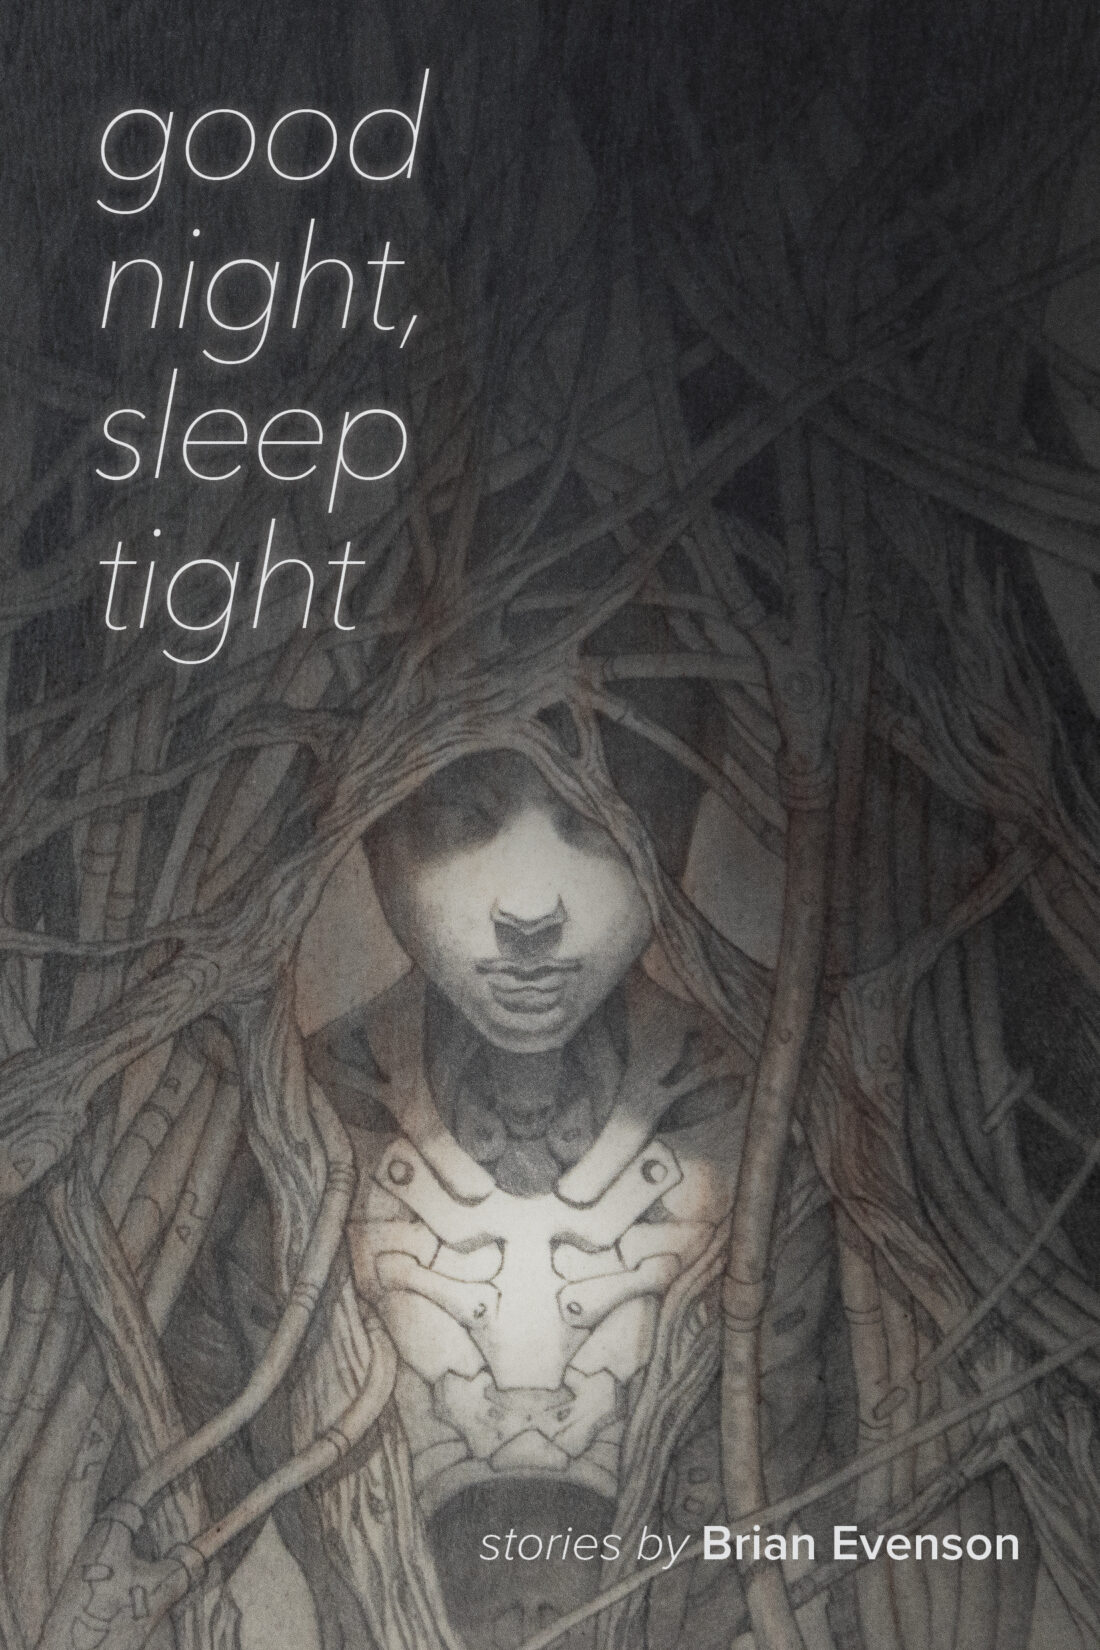 Book cover for Brian Evenson's Good Night, Sleep Tight